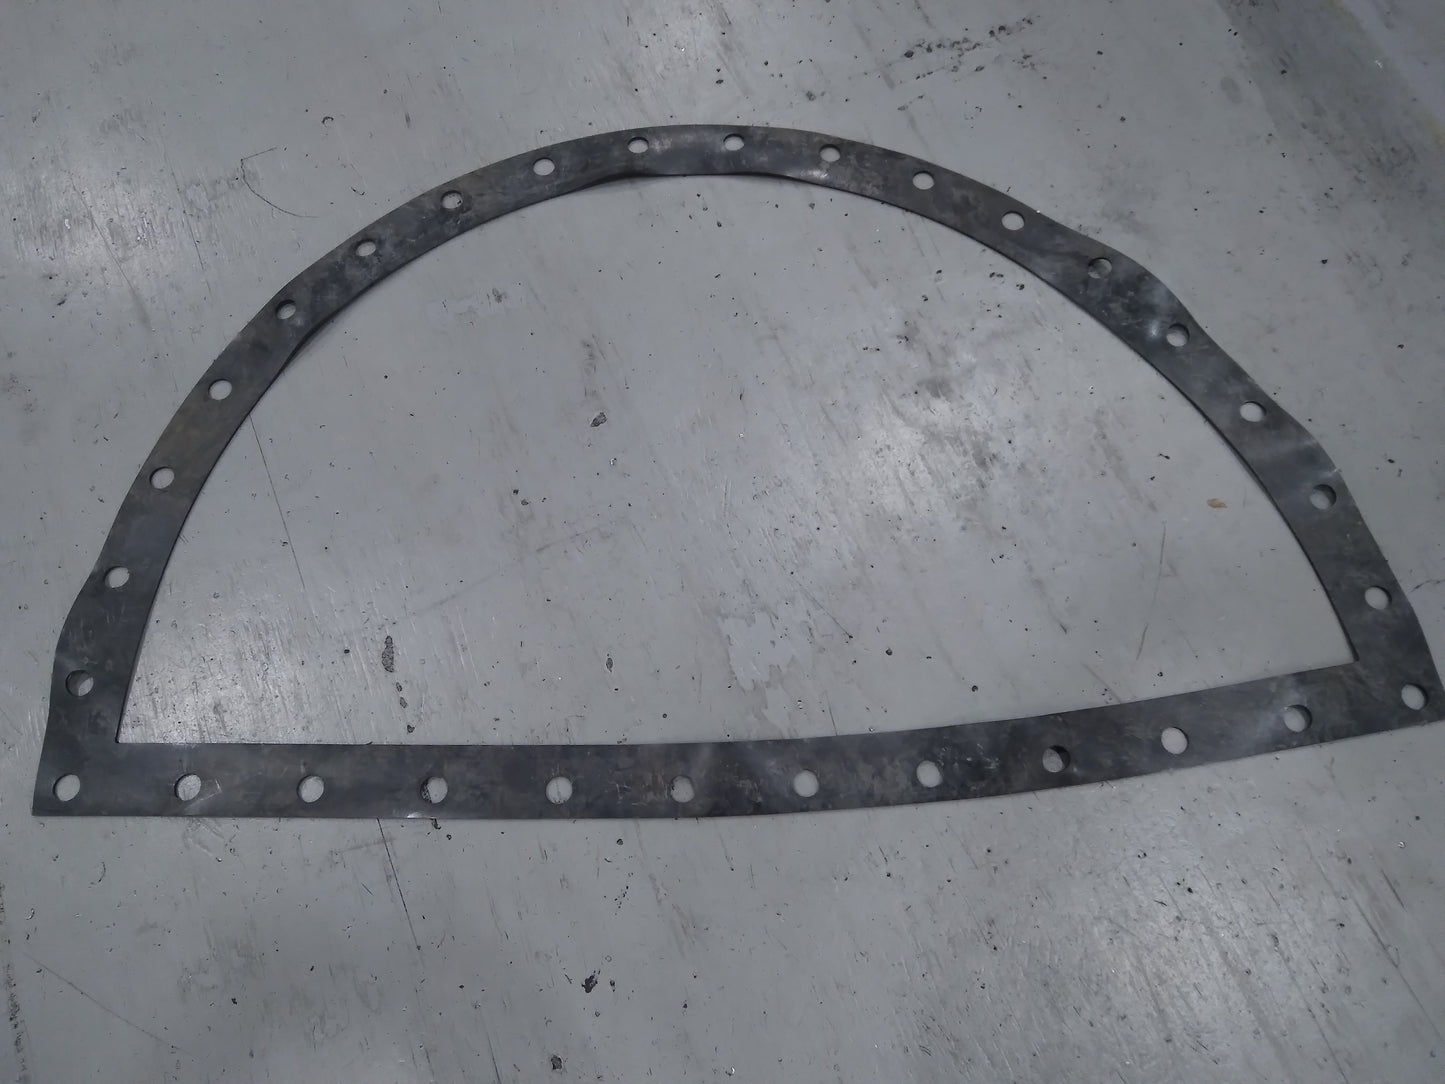 COVER GASKET;.12"T X 17.75" X 71.0"